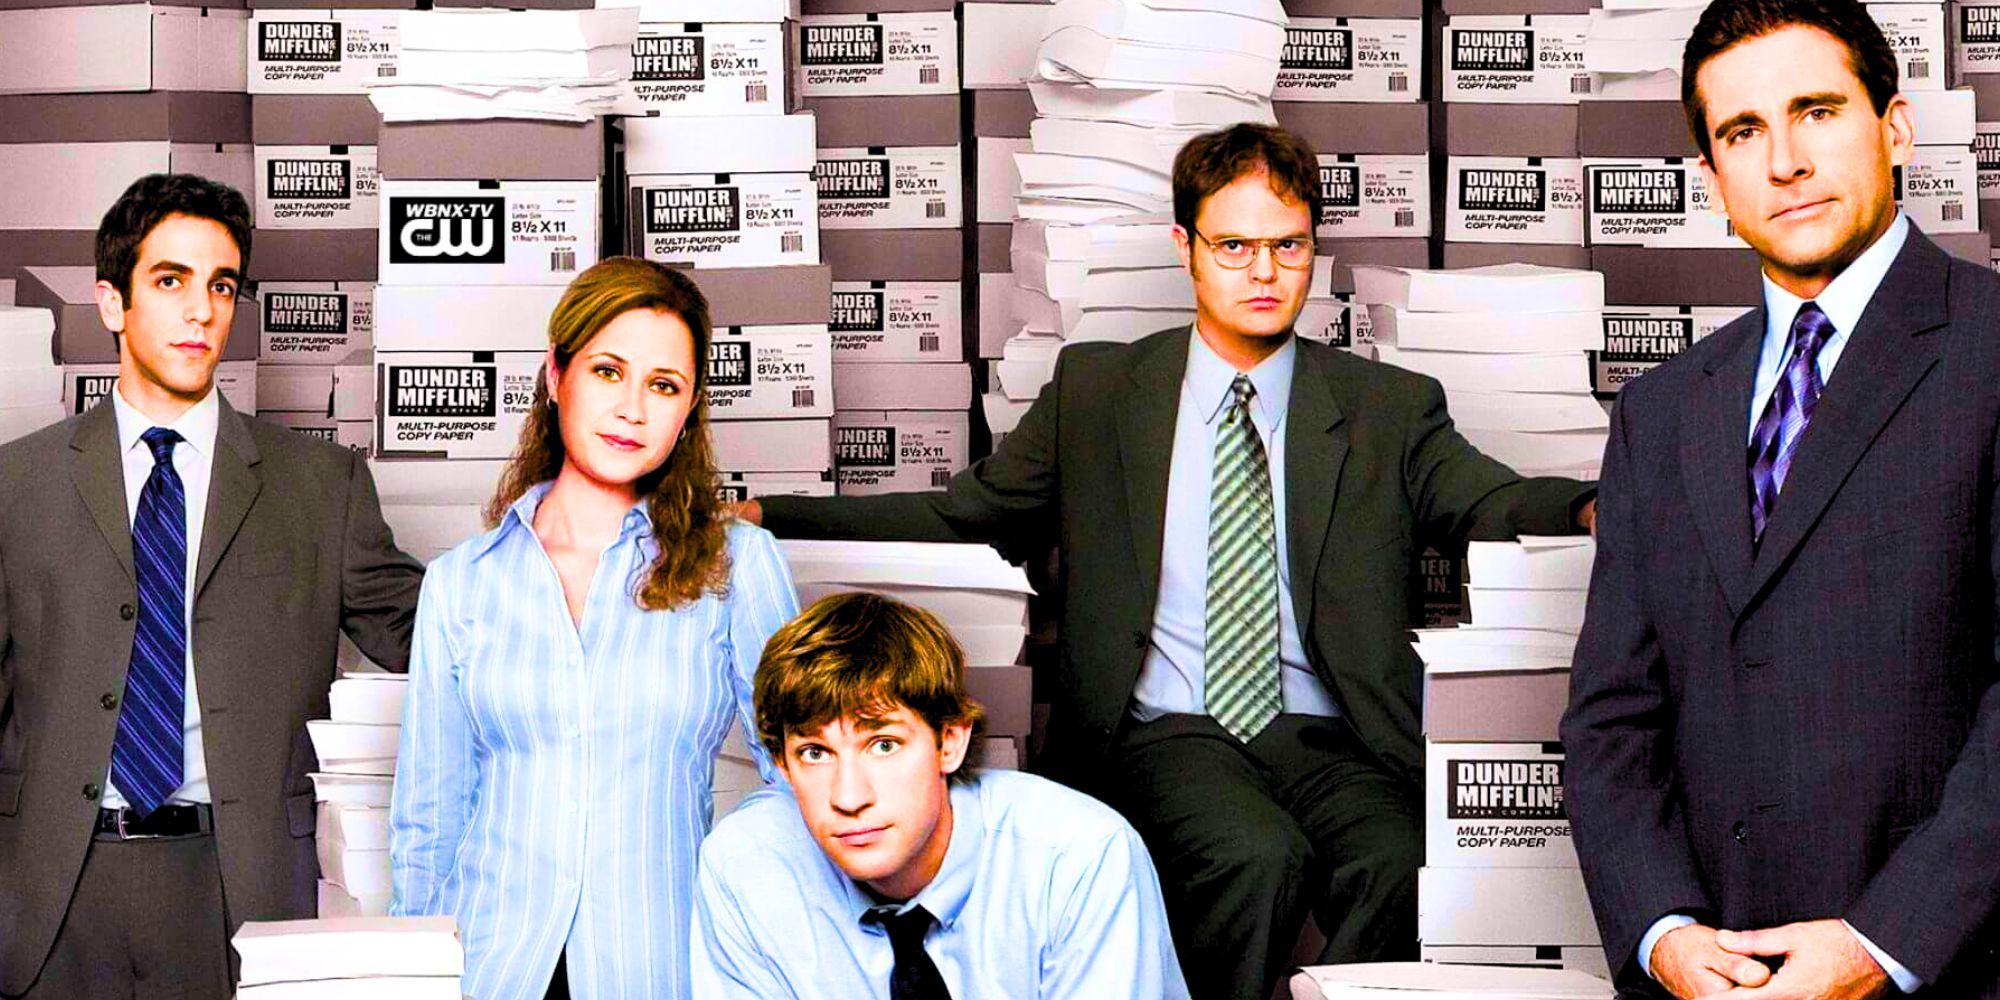 The cast of The Office posing in a promotional poster